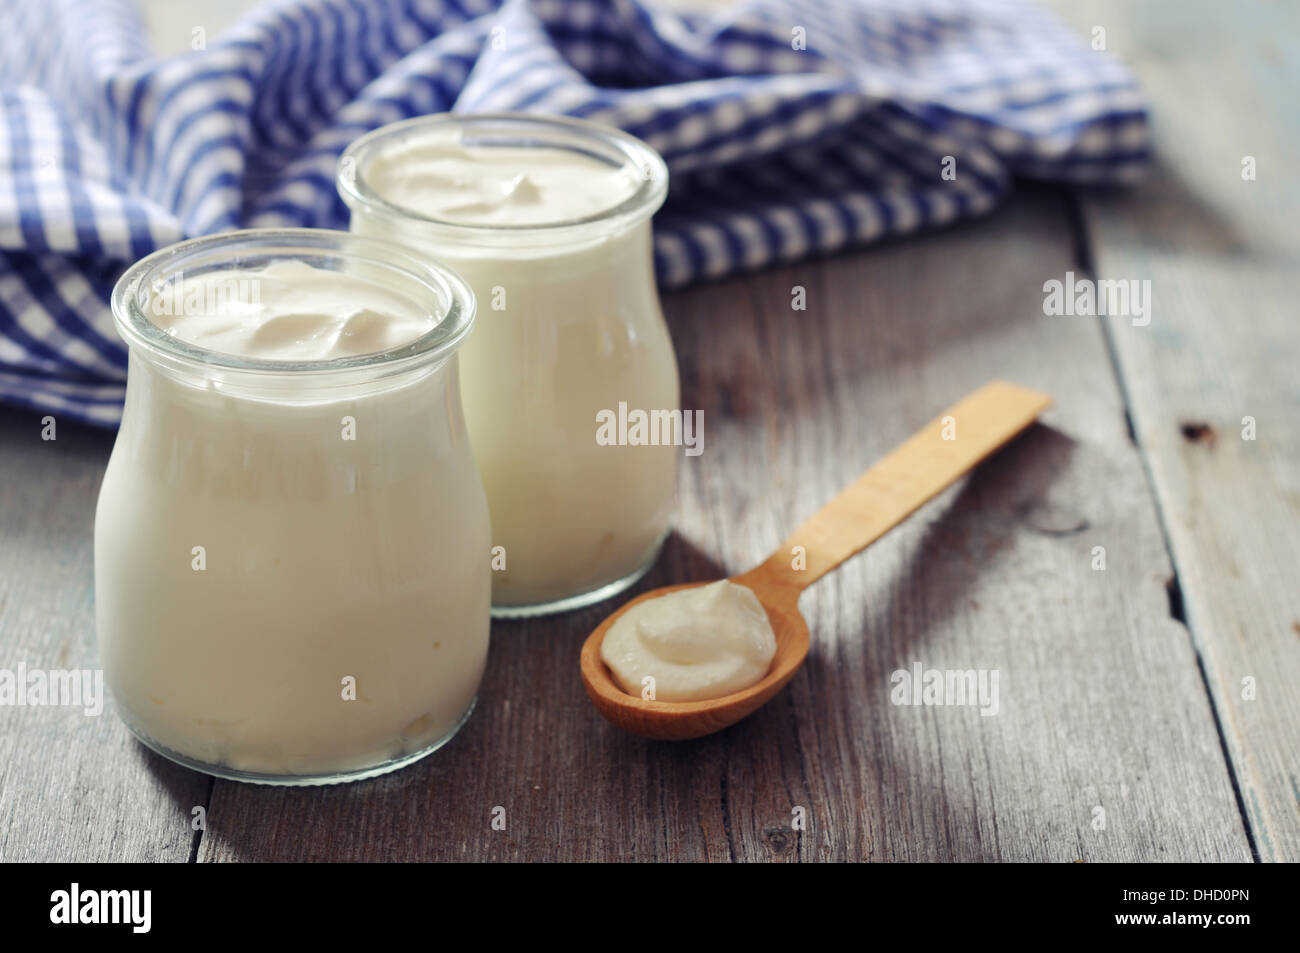 Greek yogurt in a glass jars with spoons on wooden background Stock Photo